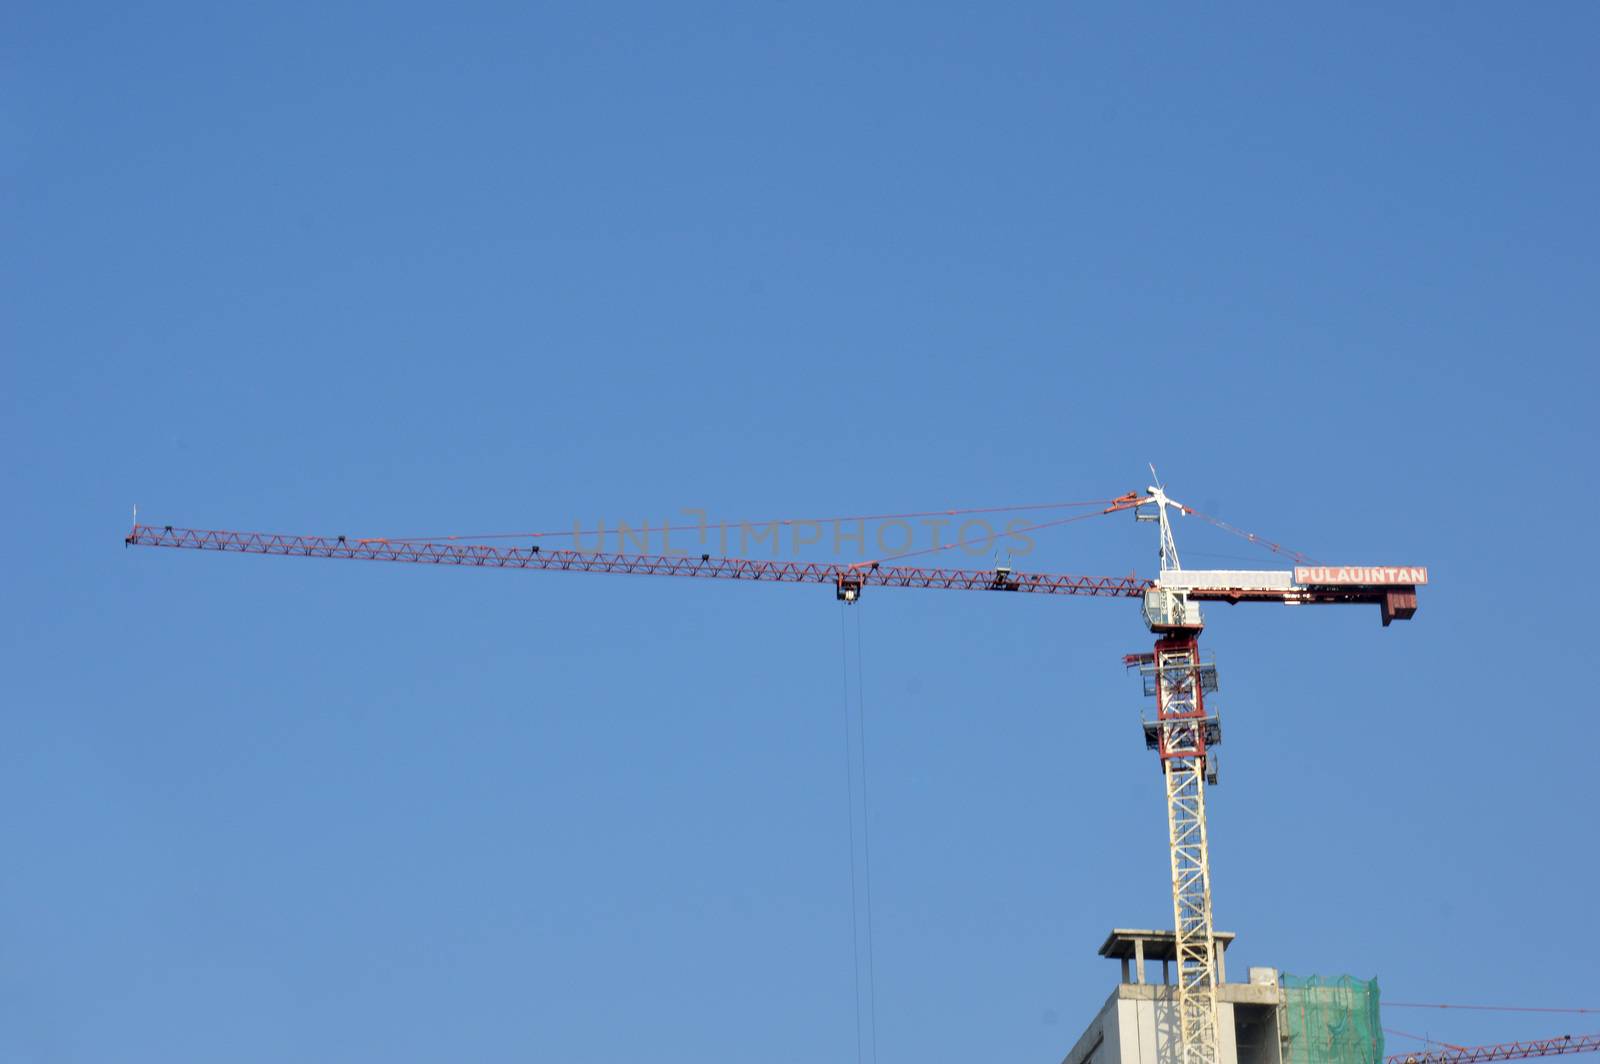 crane on a building in construction over blue sky